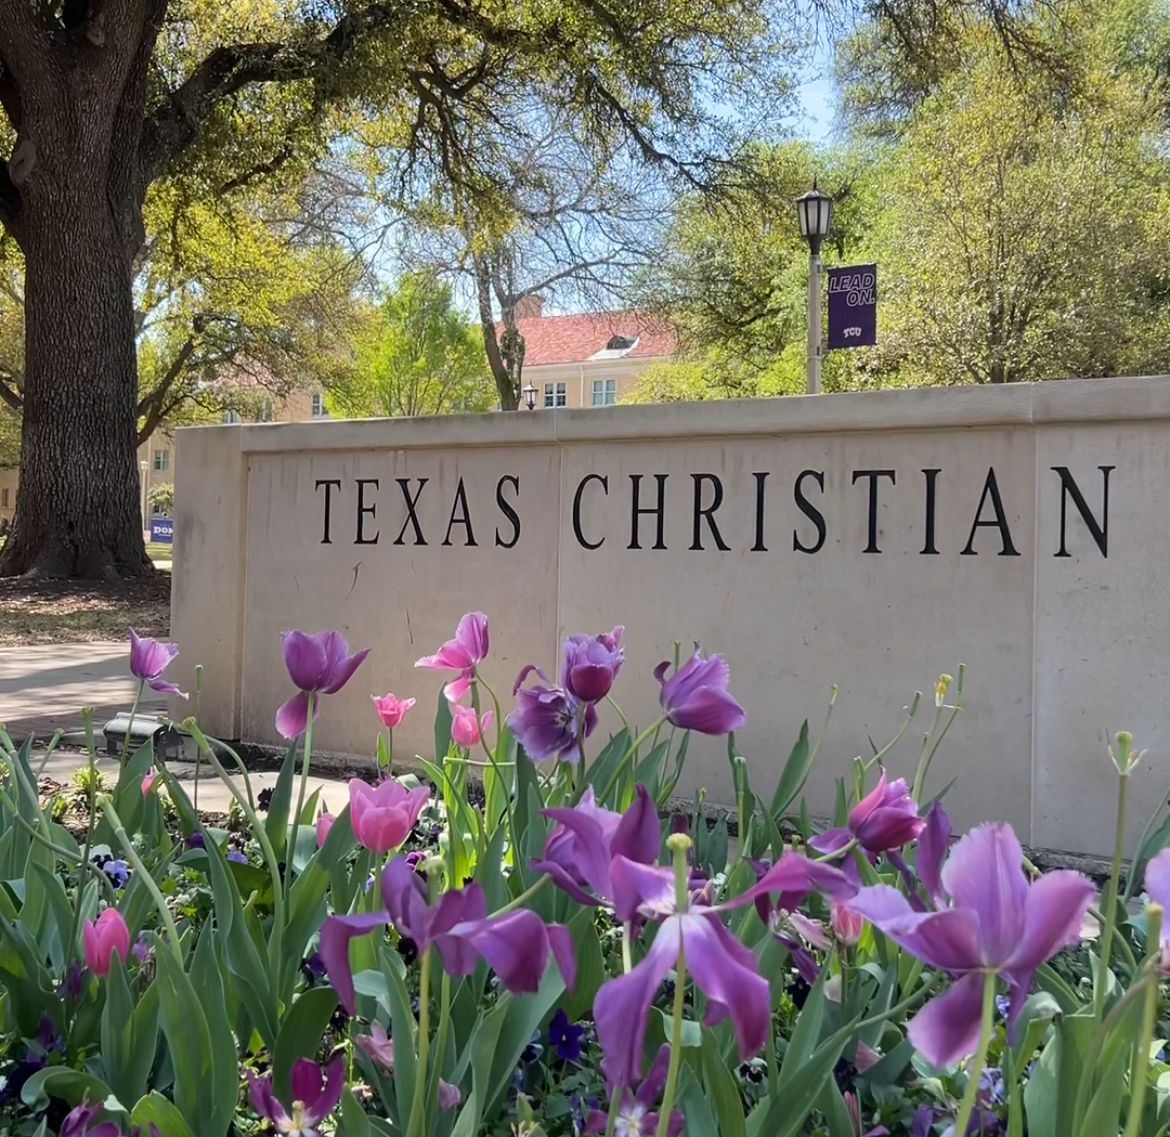 Power of the flower: The story behind TCU's tulips